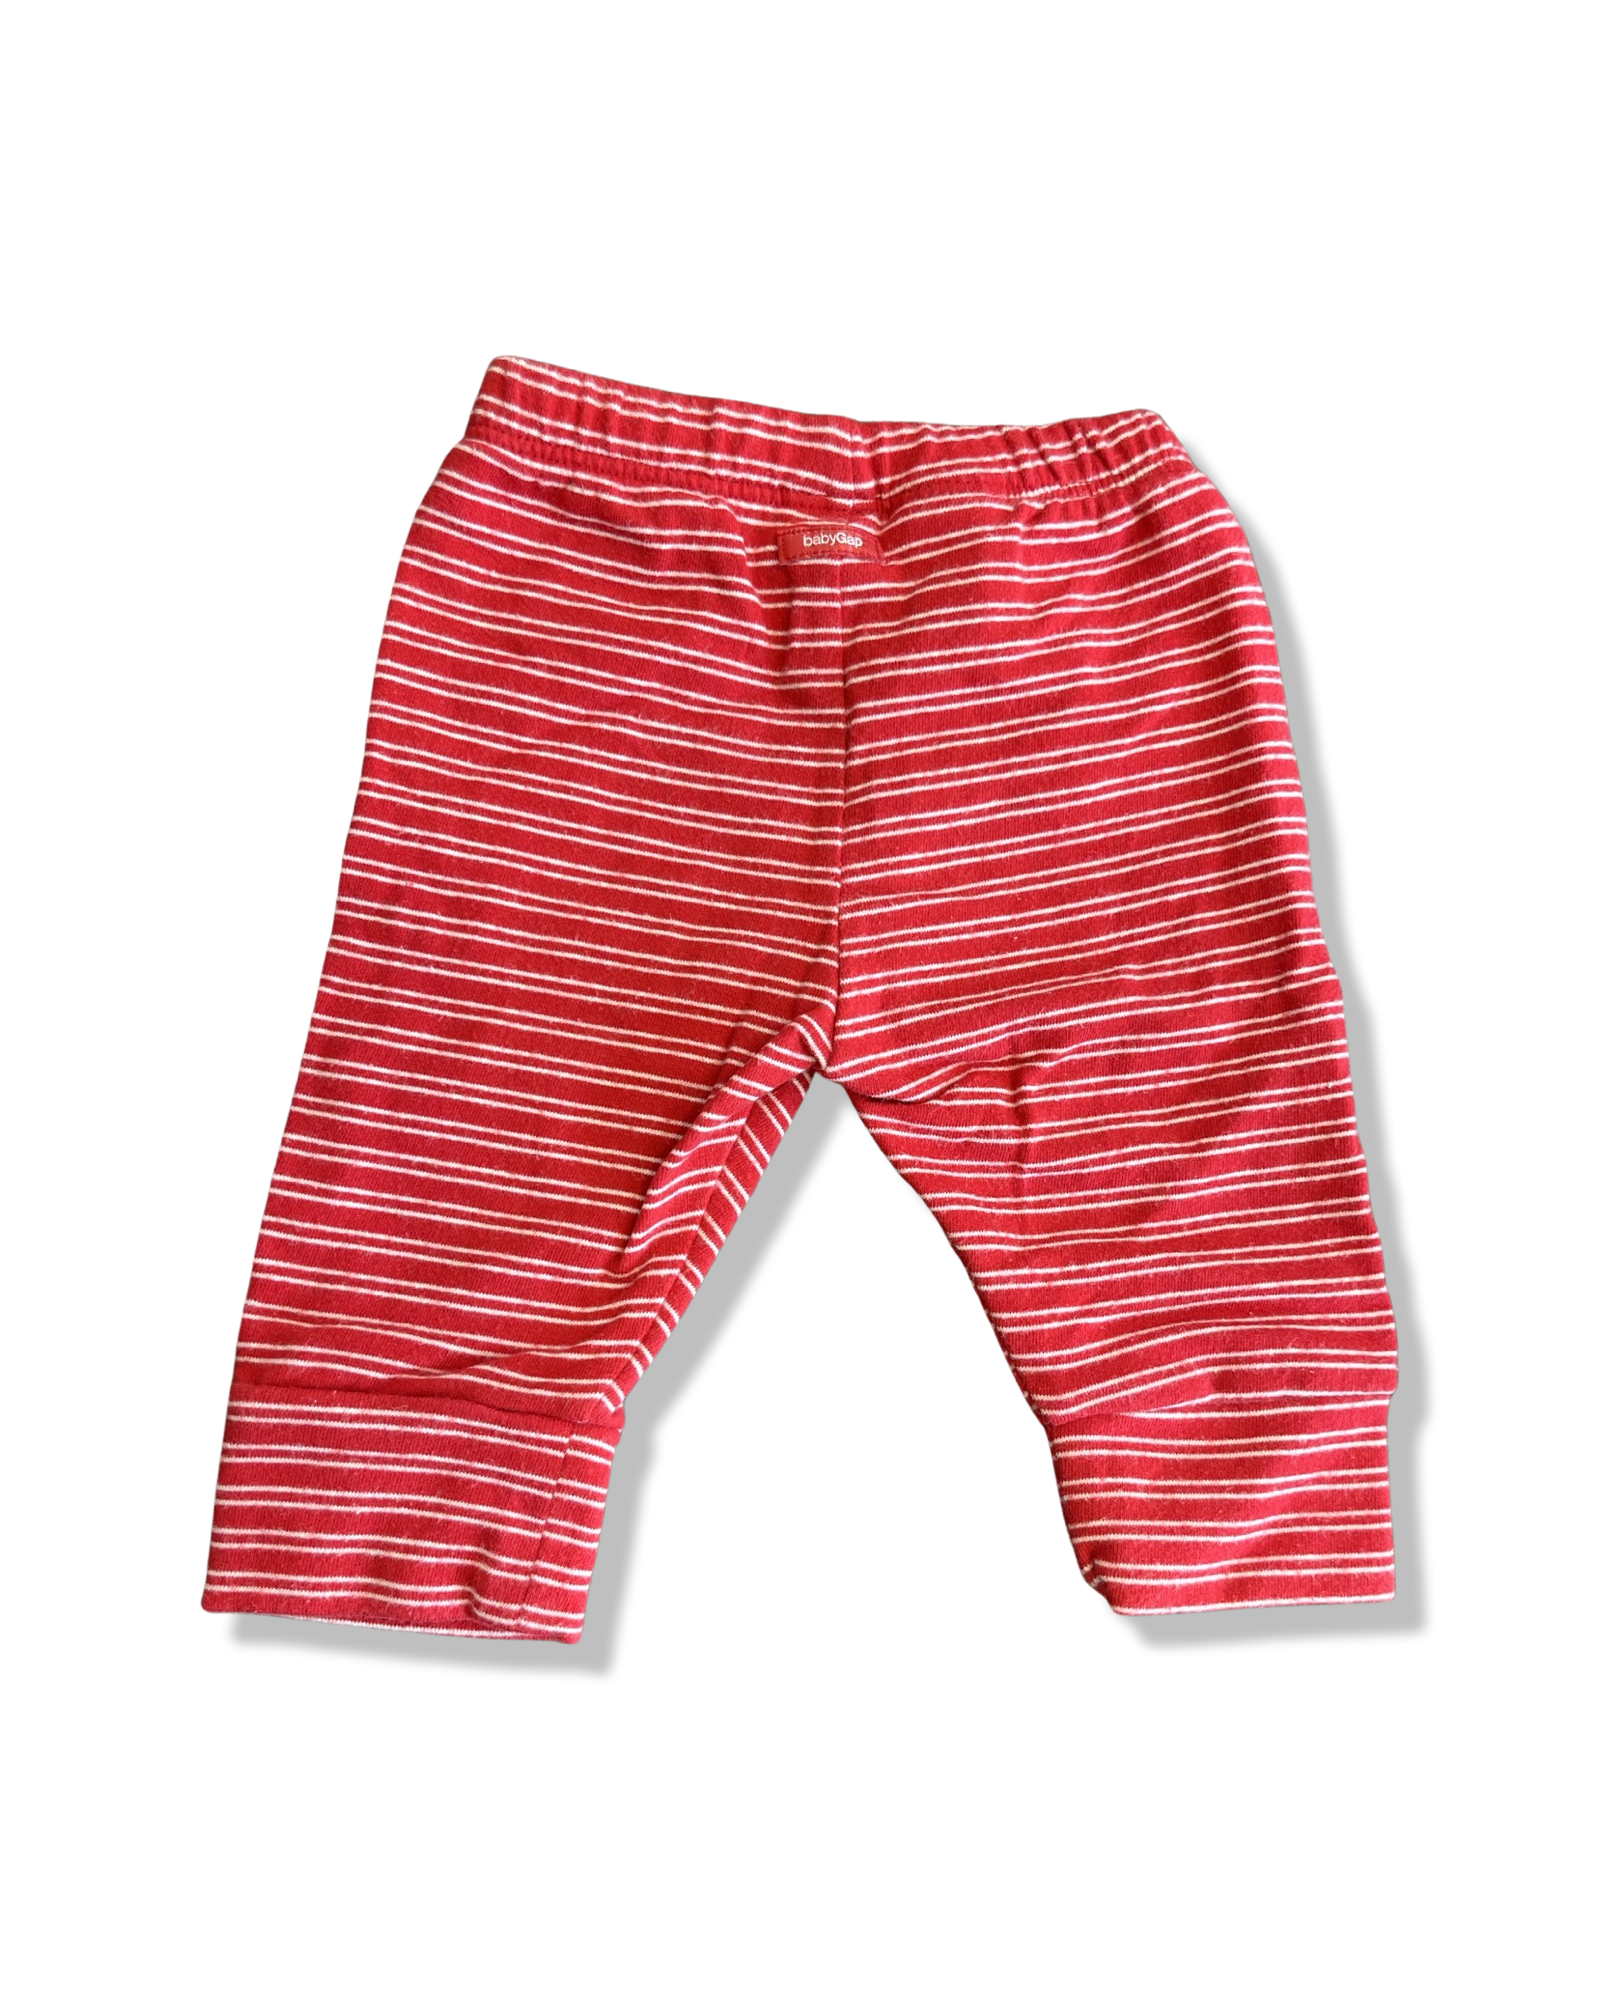 Baby Gap Red and White Stripe Pants (0-3M)